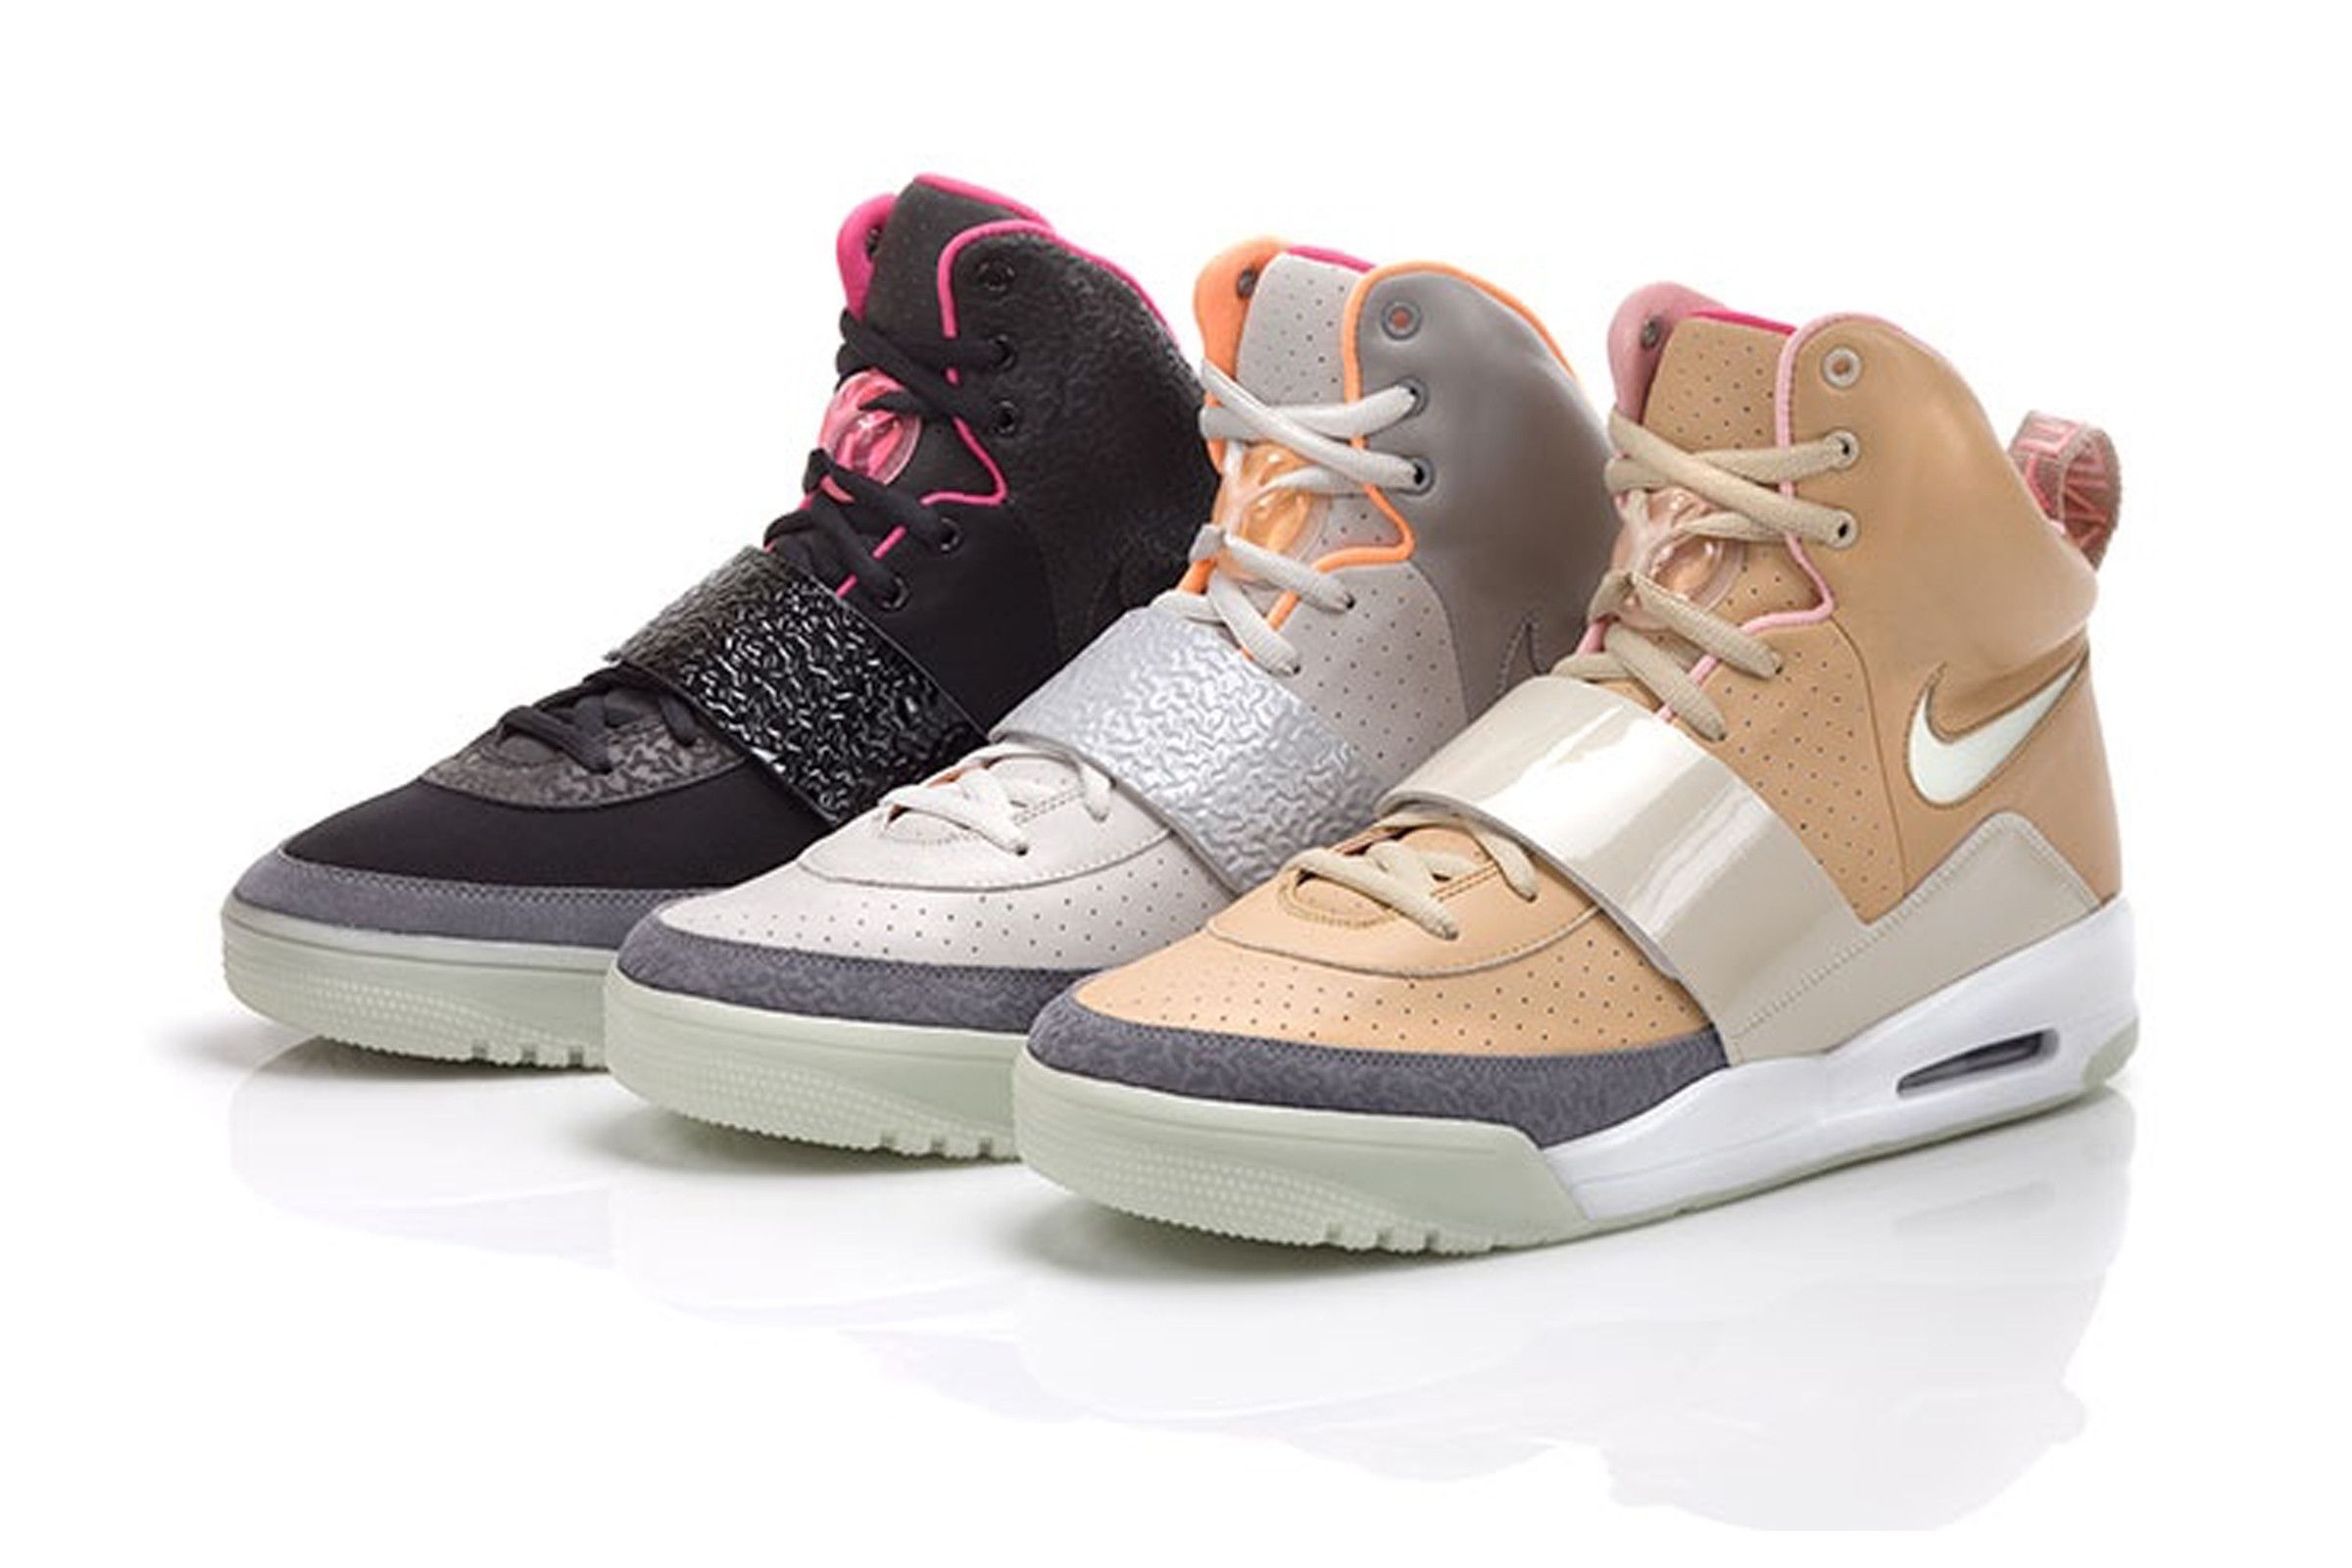 All three colorways of Nike's Air Yeezy I; (from left) Blink Black and Pink, Zen Grey and Net Tan